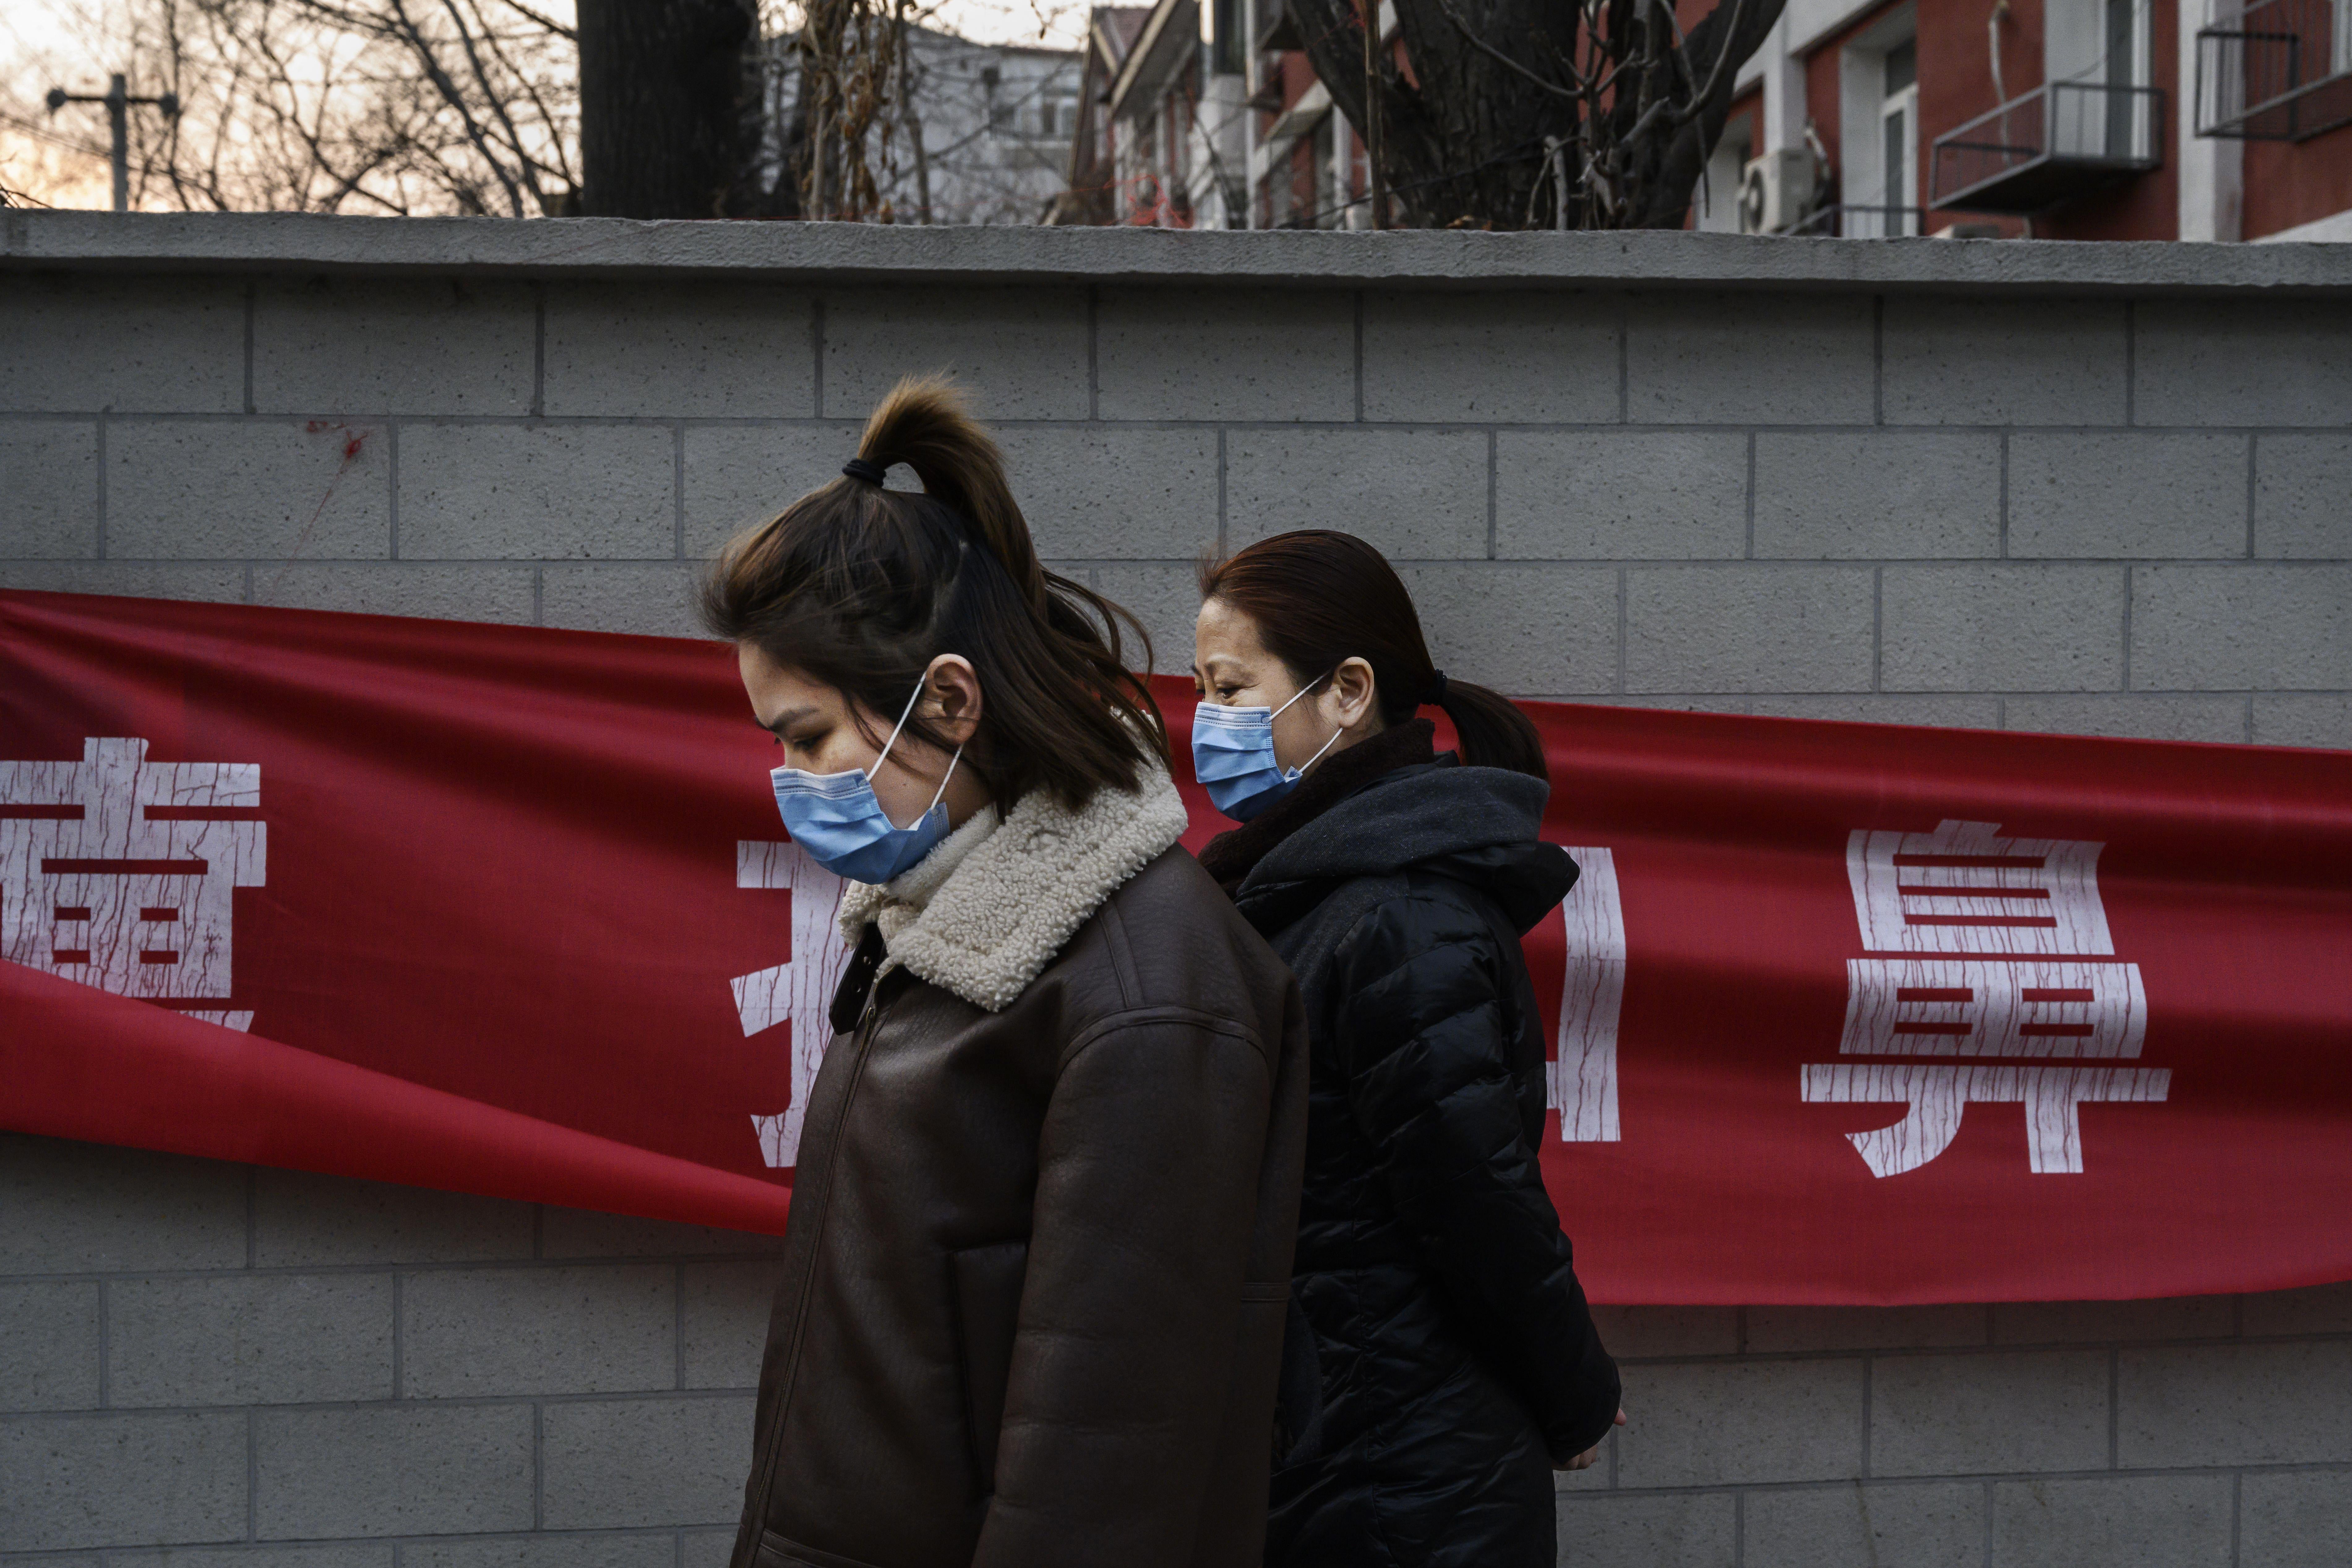 Two women wearing parkas and masks walk by a red banner.